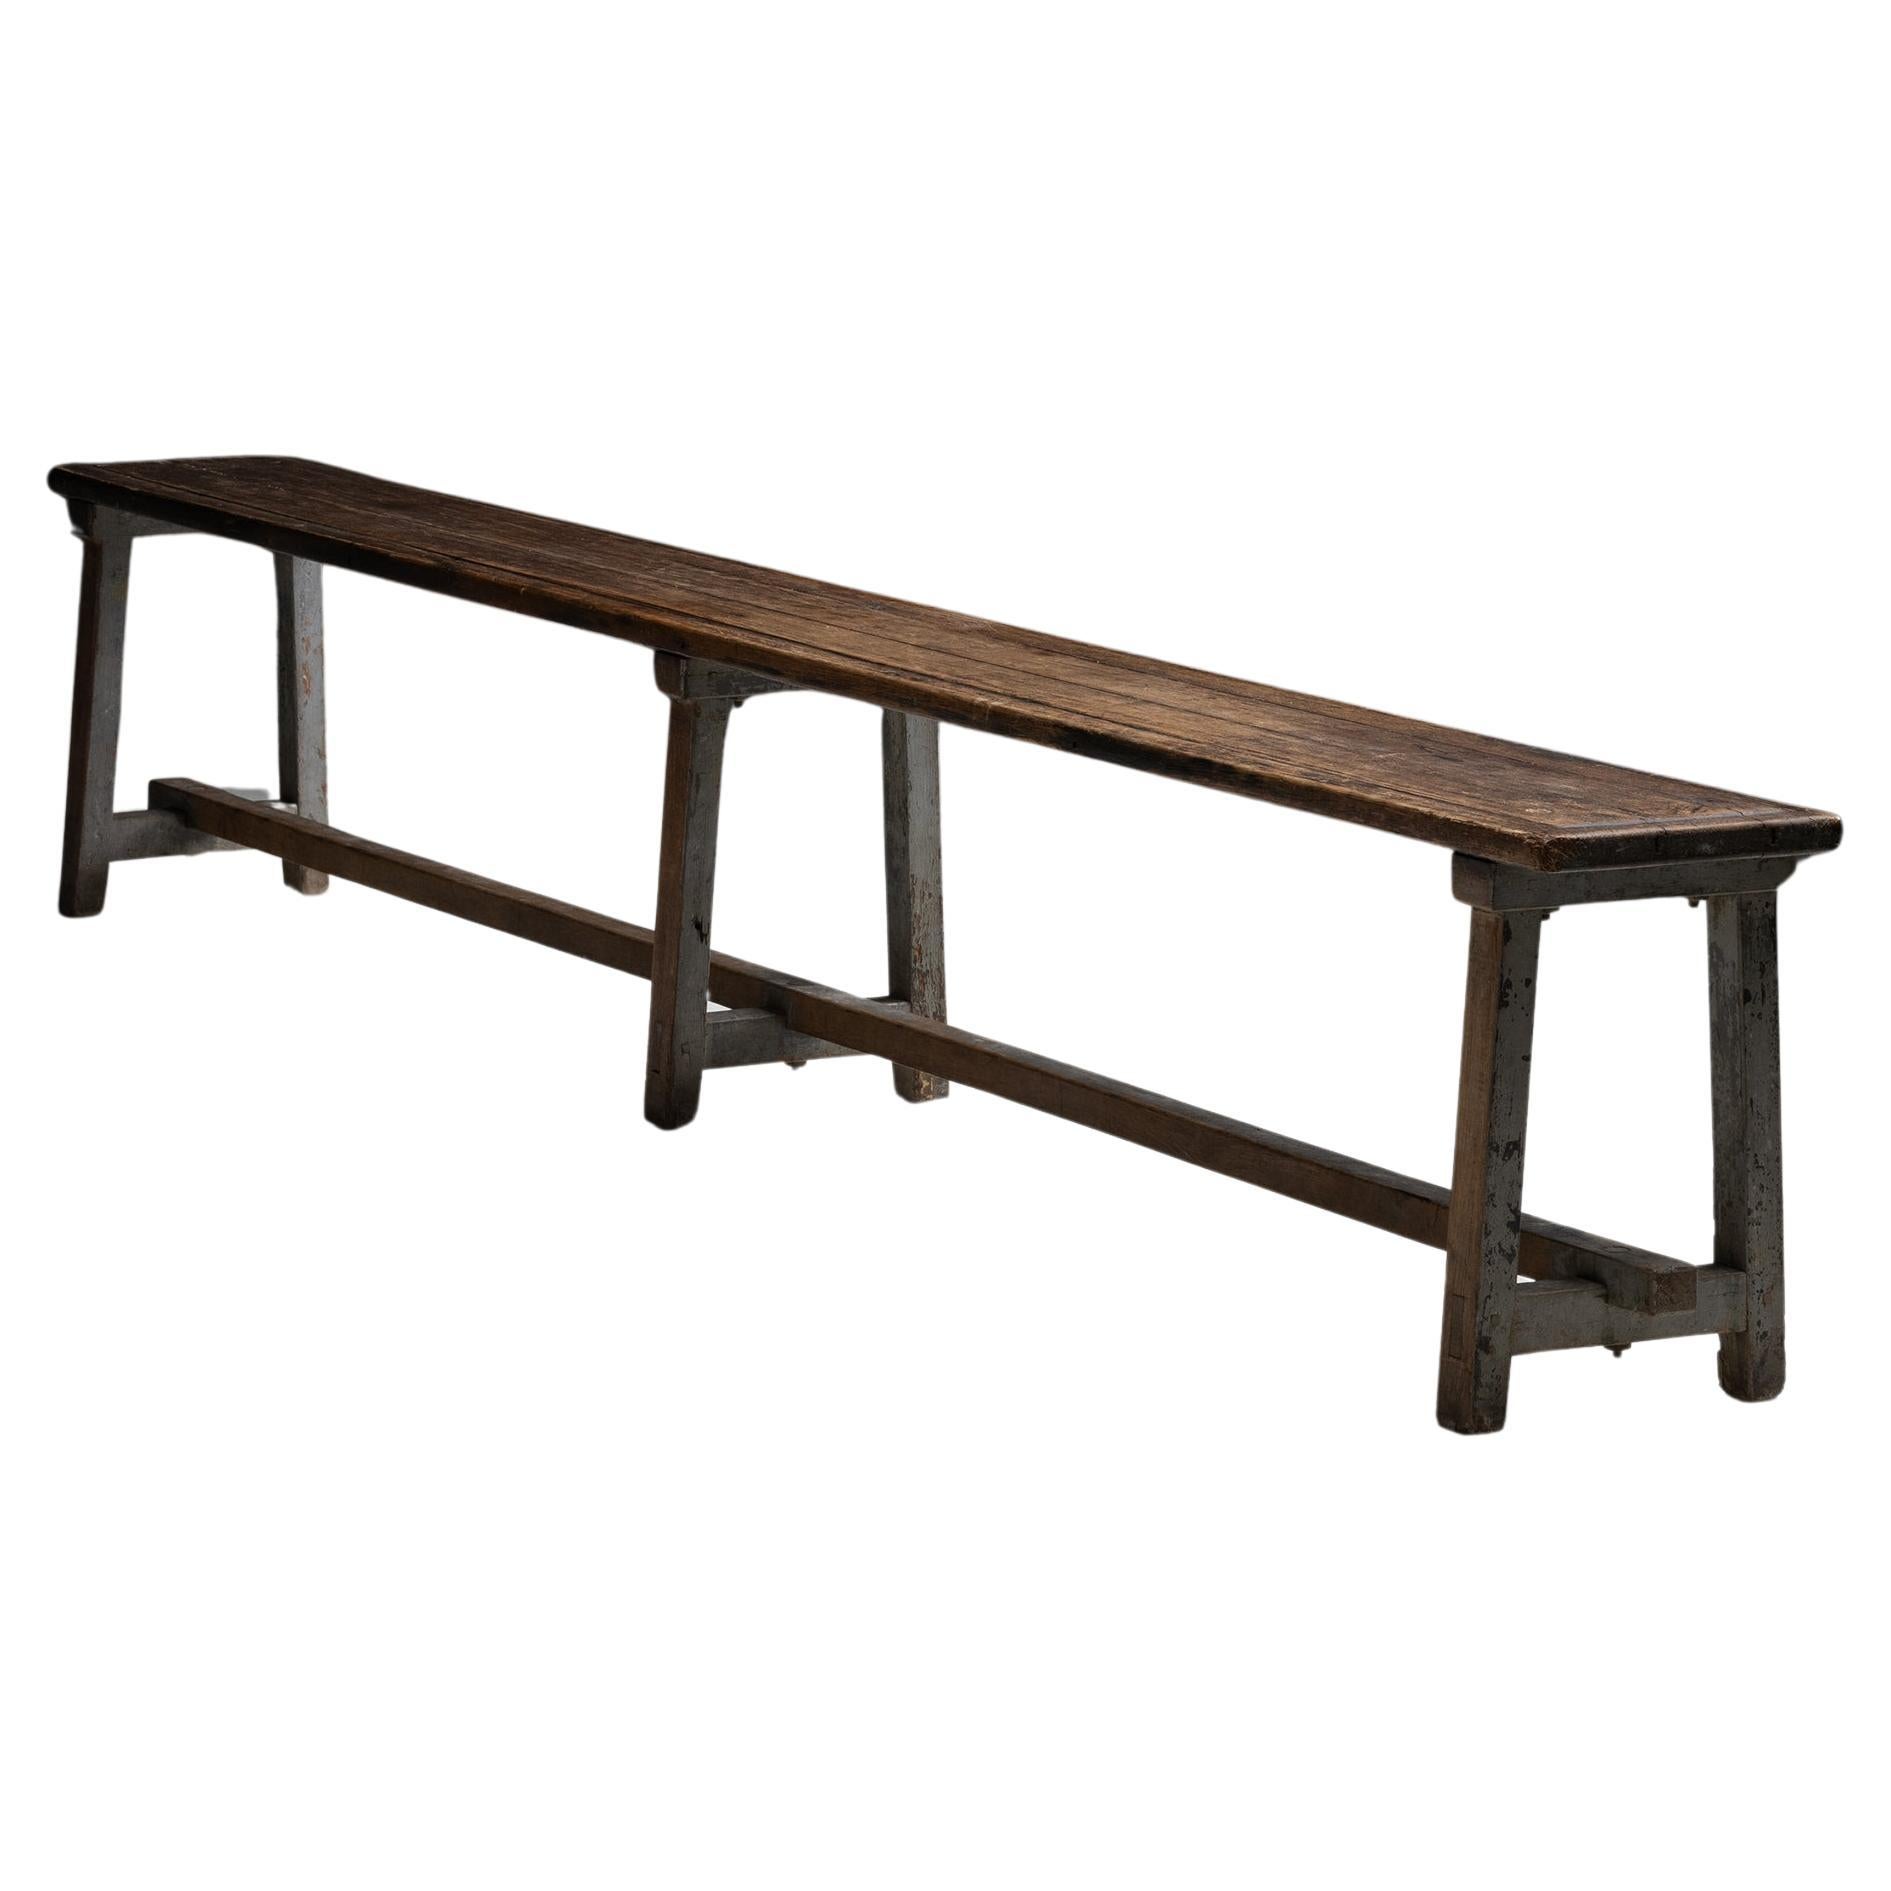 Primitive Benches For Sale